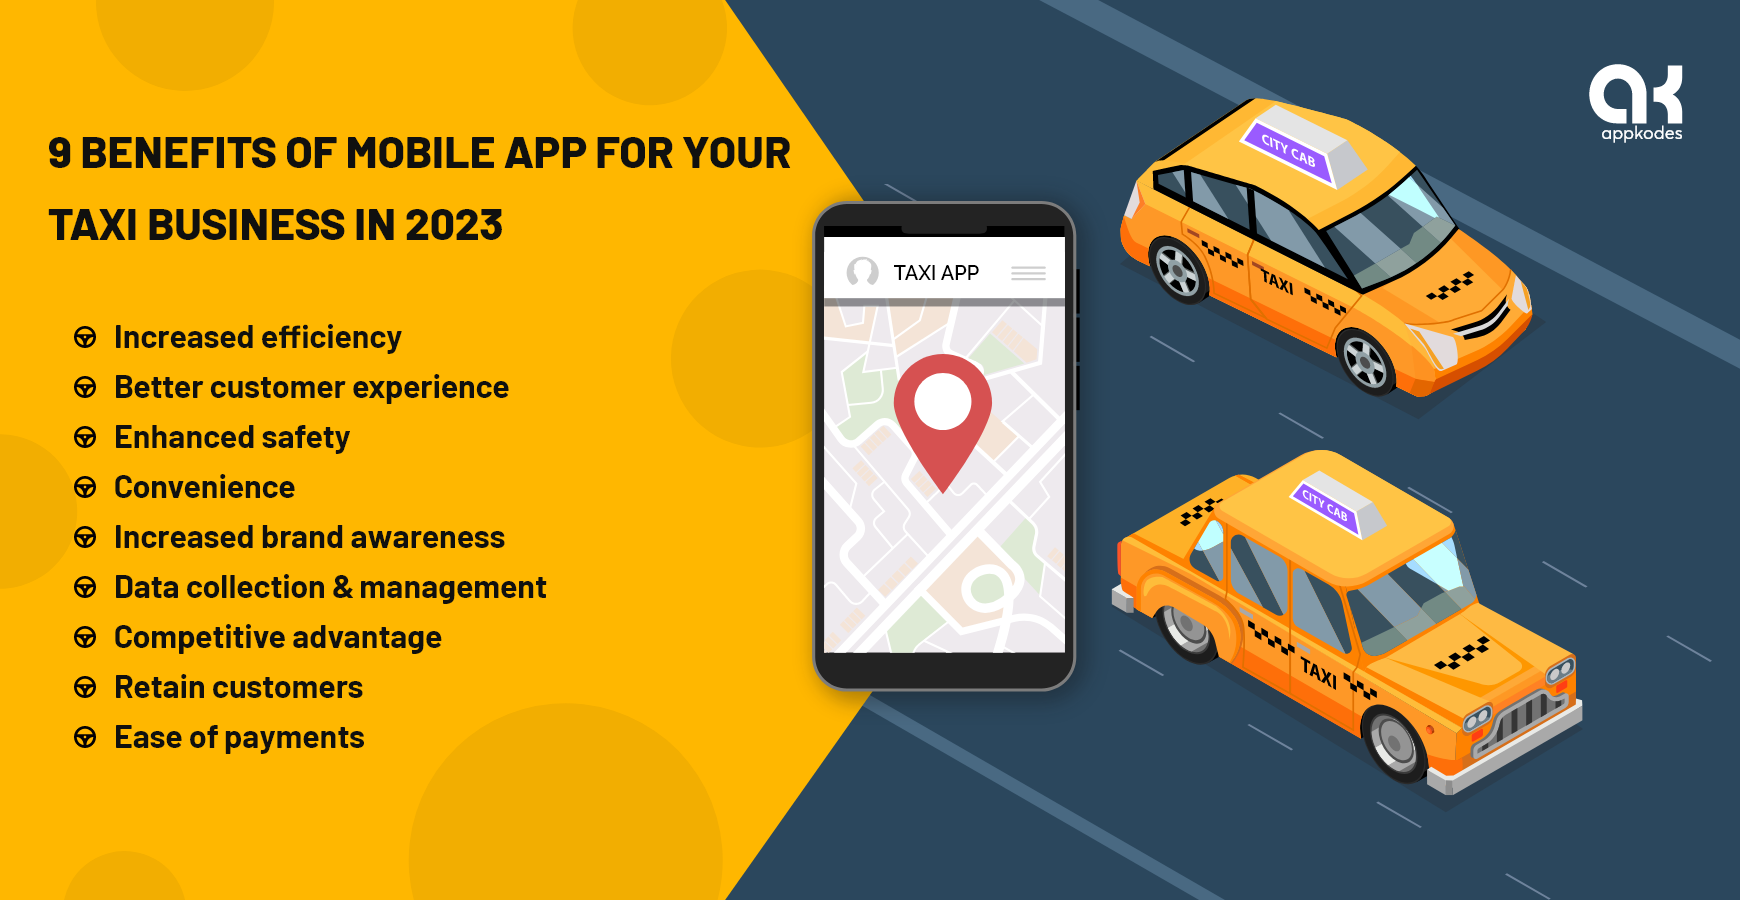 Mobile apps in taxi business